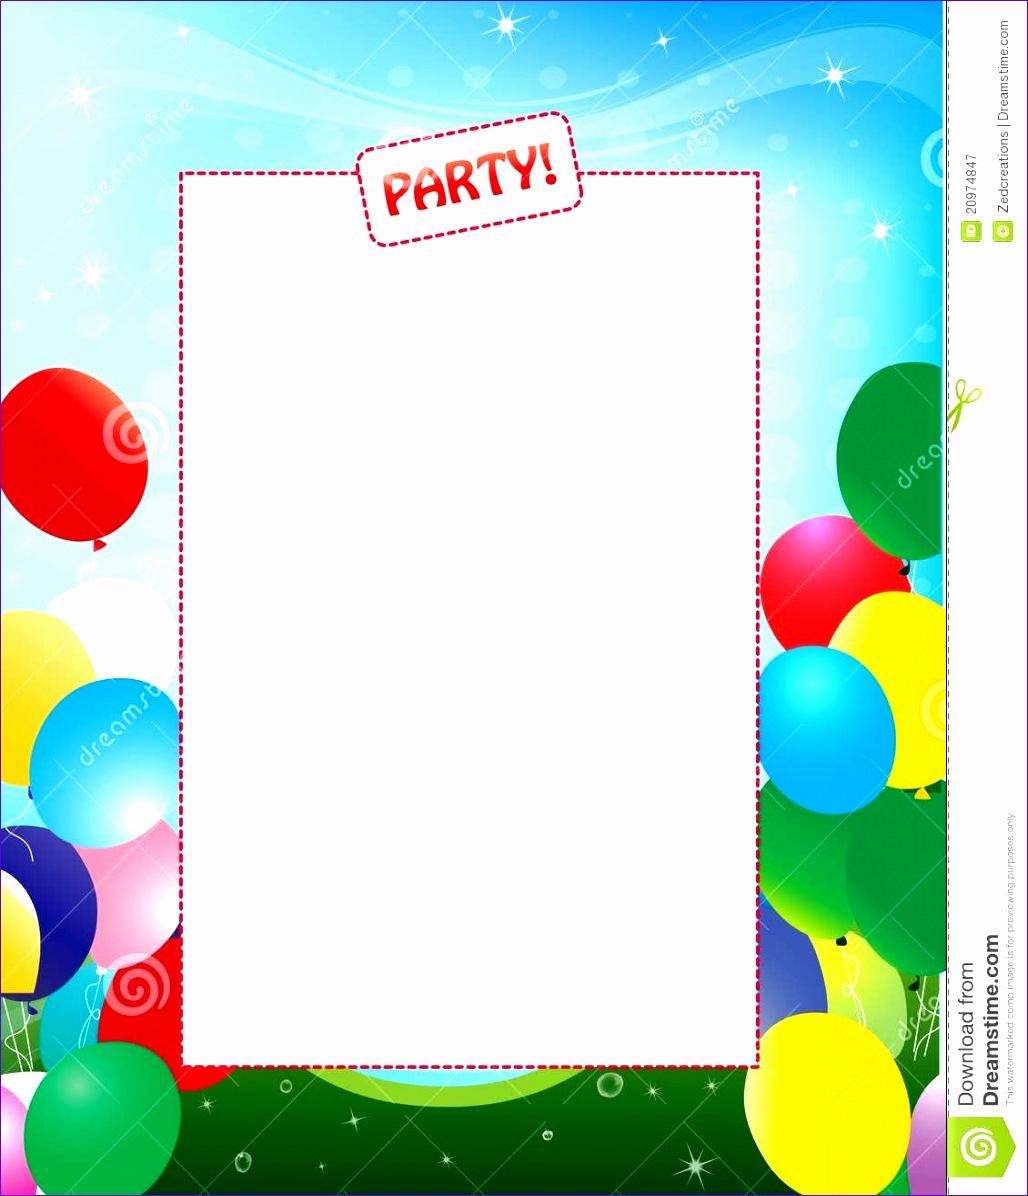 party invitation background 10281196